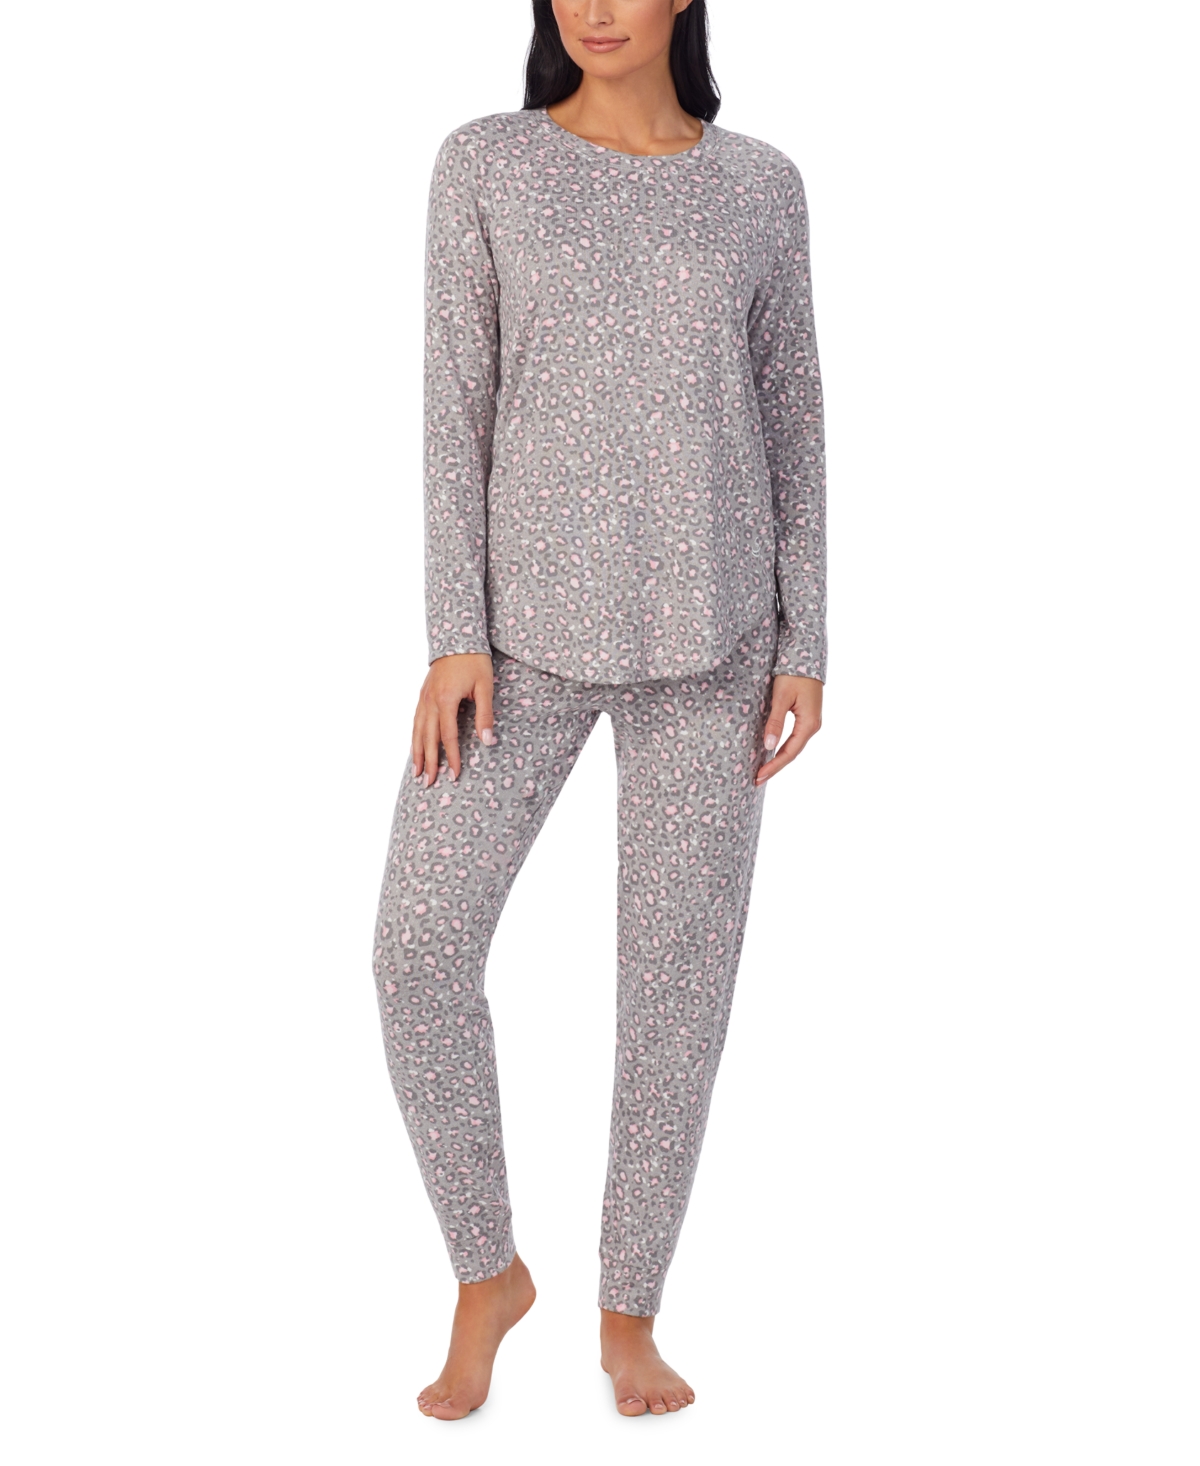 Cuddl Duds Women's Brushed Sweater-knit Long-sleeve Pajama Set In Grey Leopard